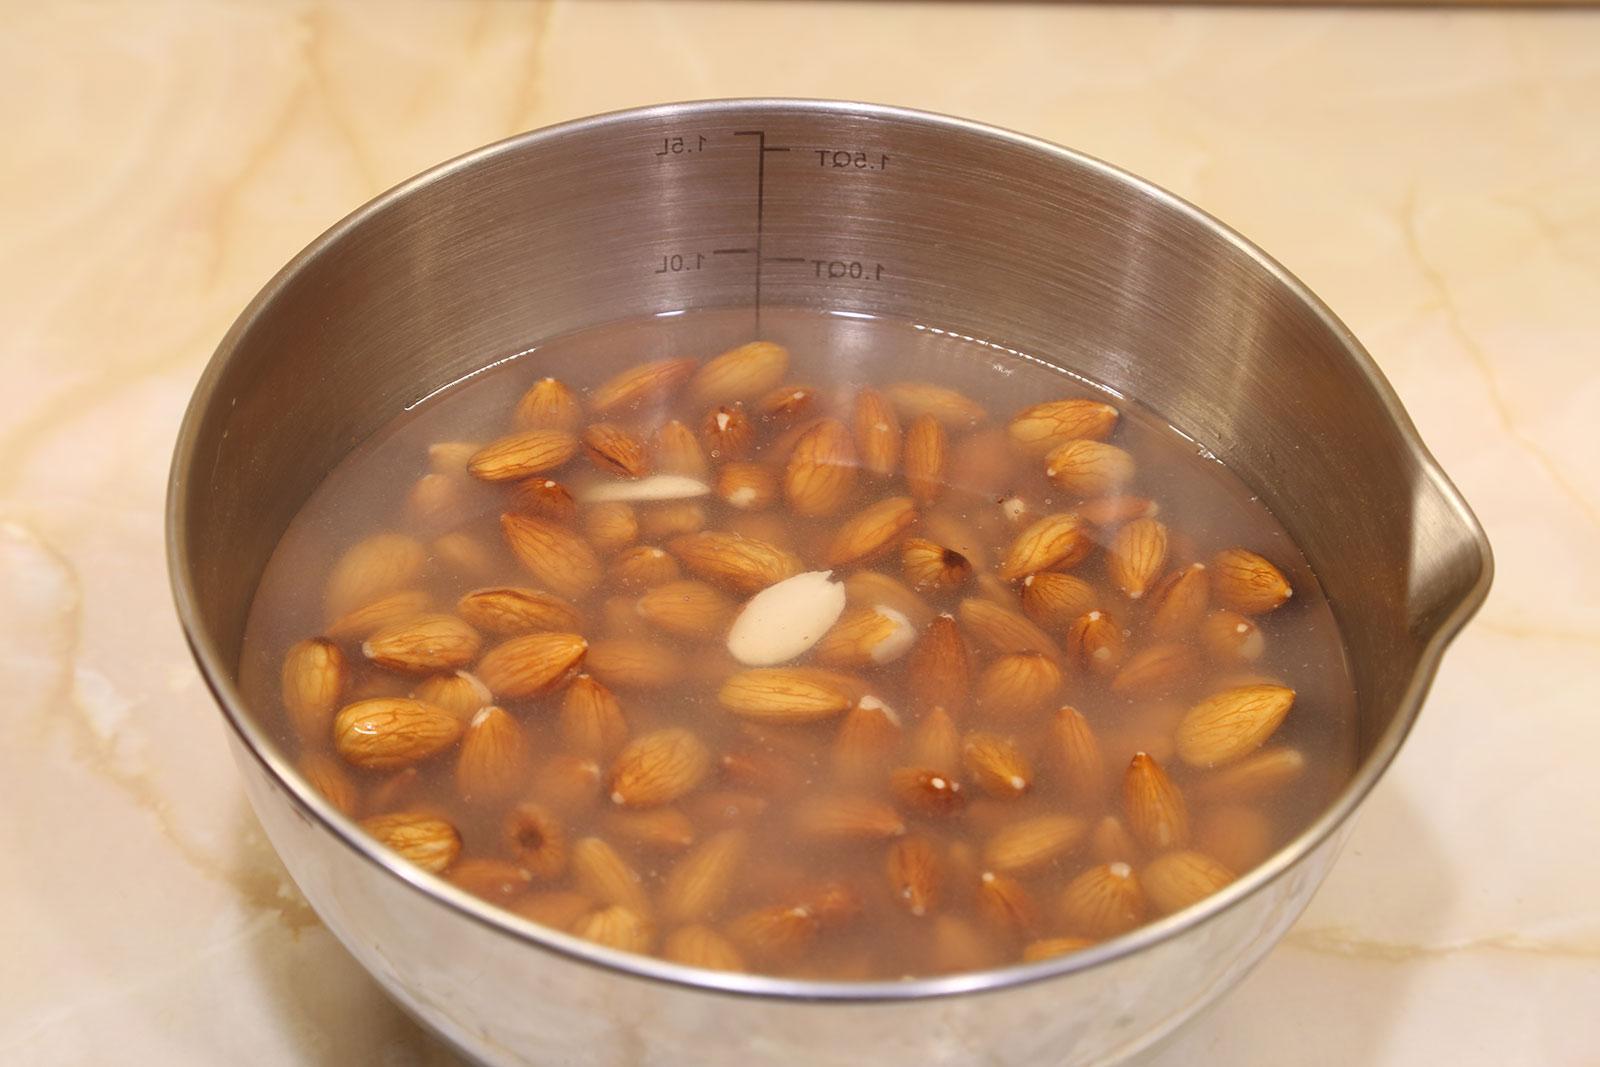 Strain the cloudy water from the almonds and rinse with fresh water.